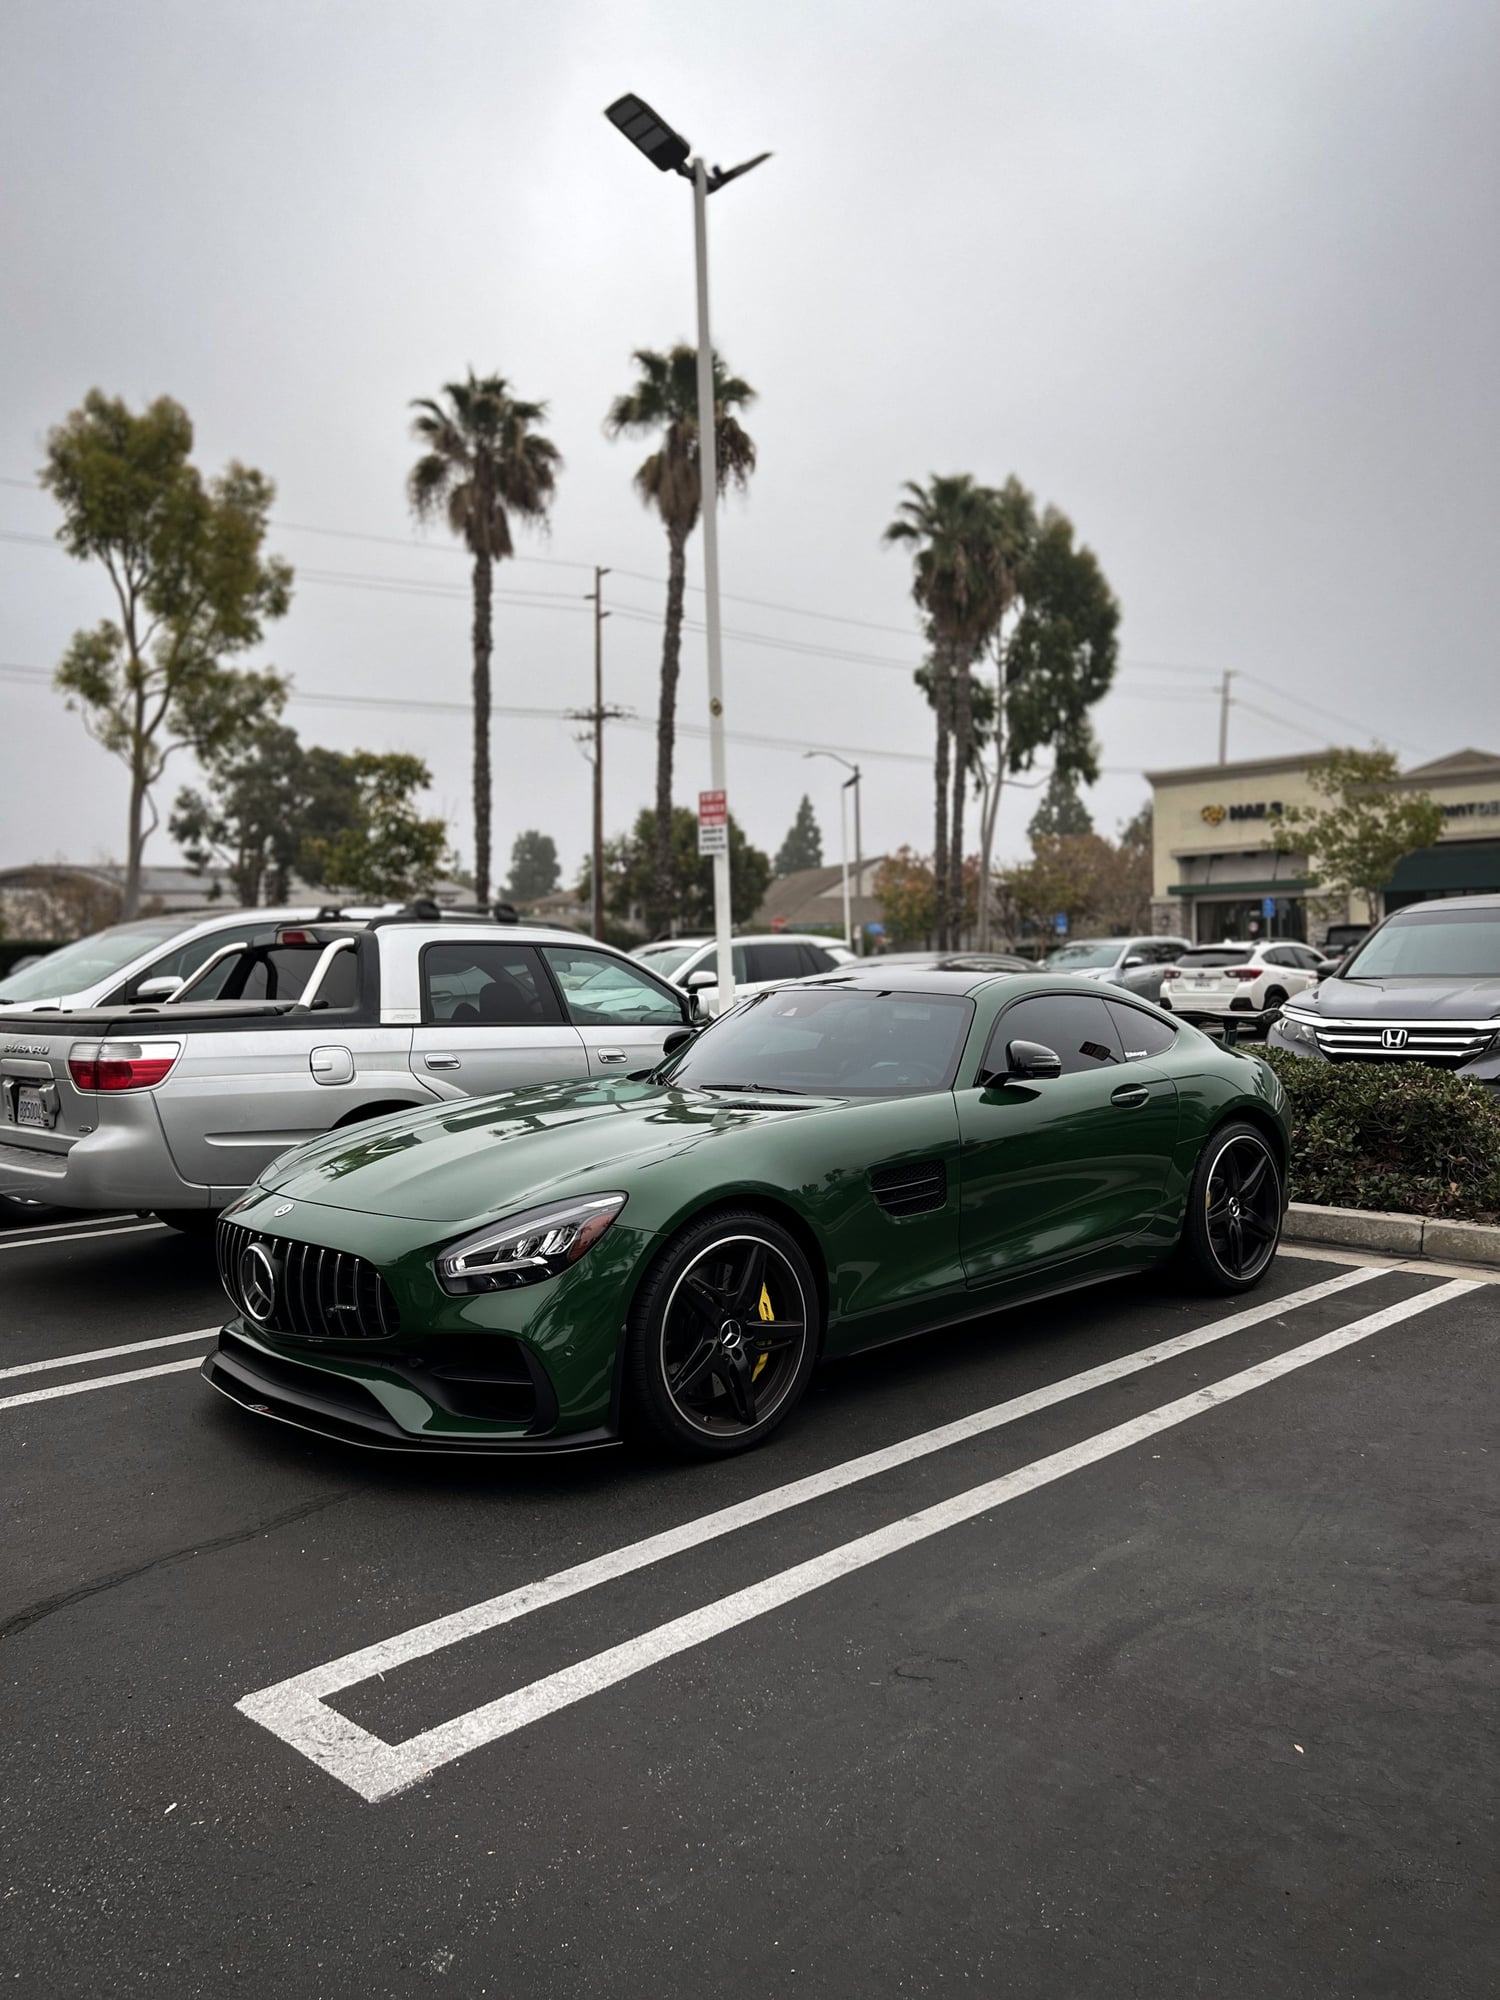 Wheels and Tires/Axles - OEM Wheels and Tires 2020 amg gt - Used - 2017 to 2021 Mercedes-Benz AMG GT - Yorba Linda, CA 92886, United States